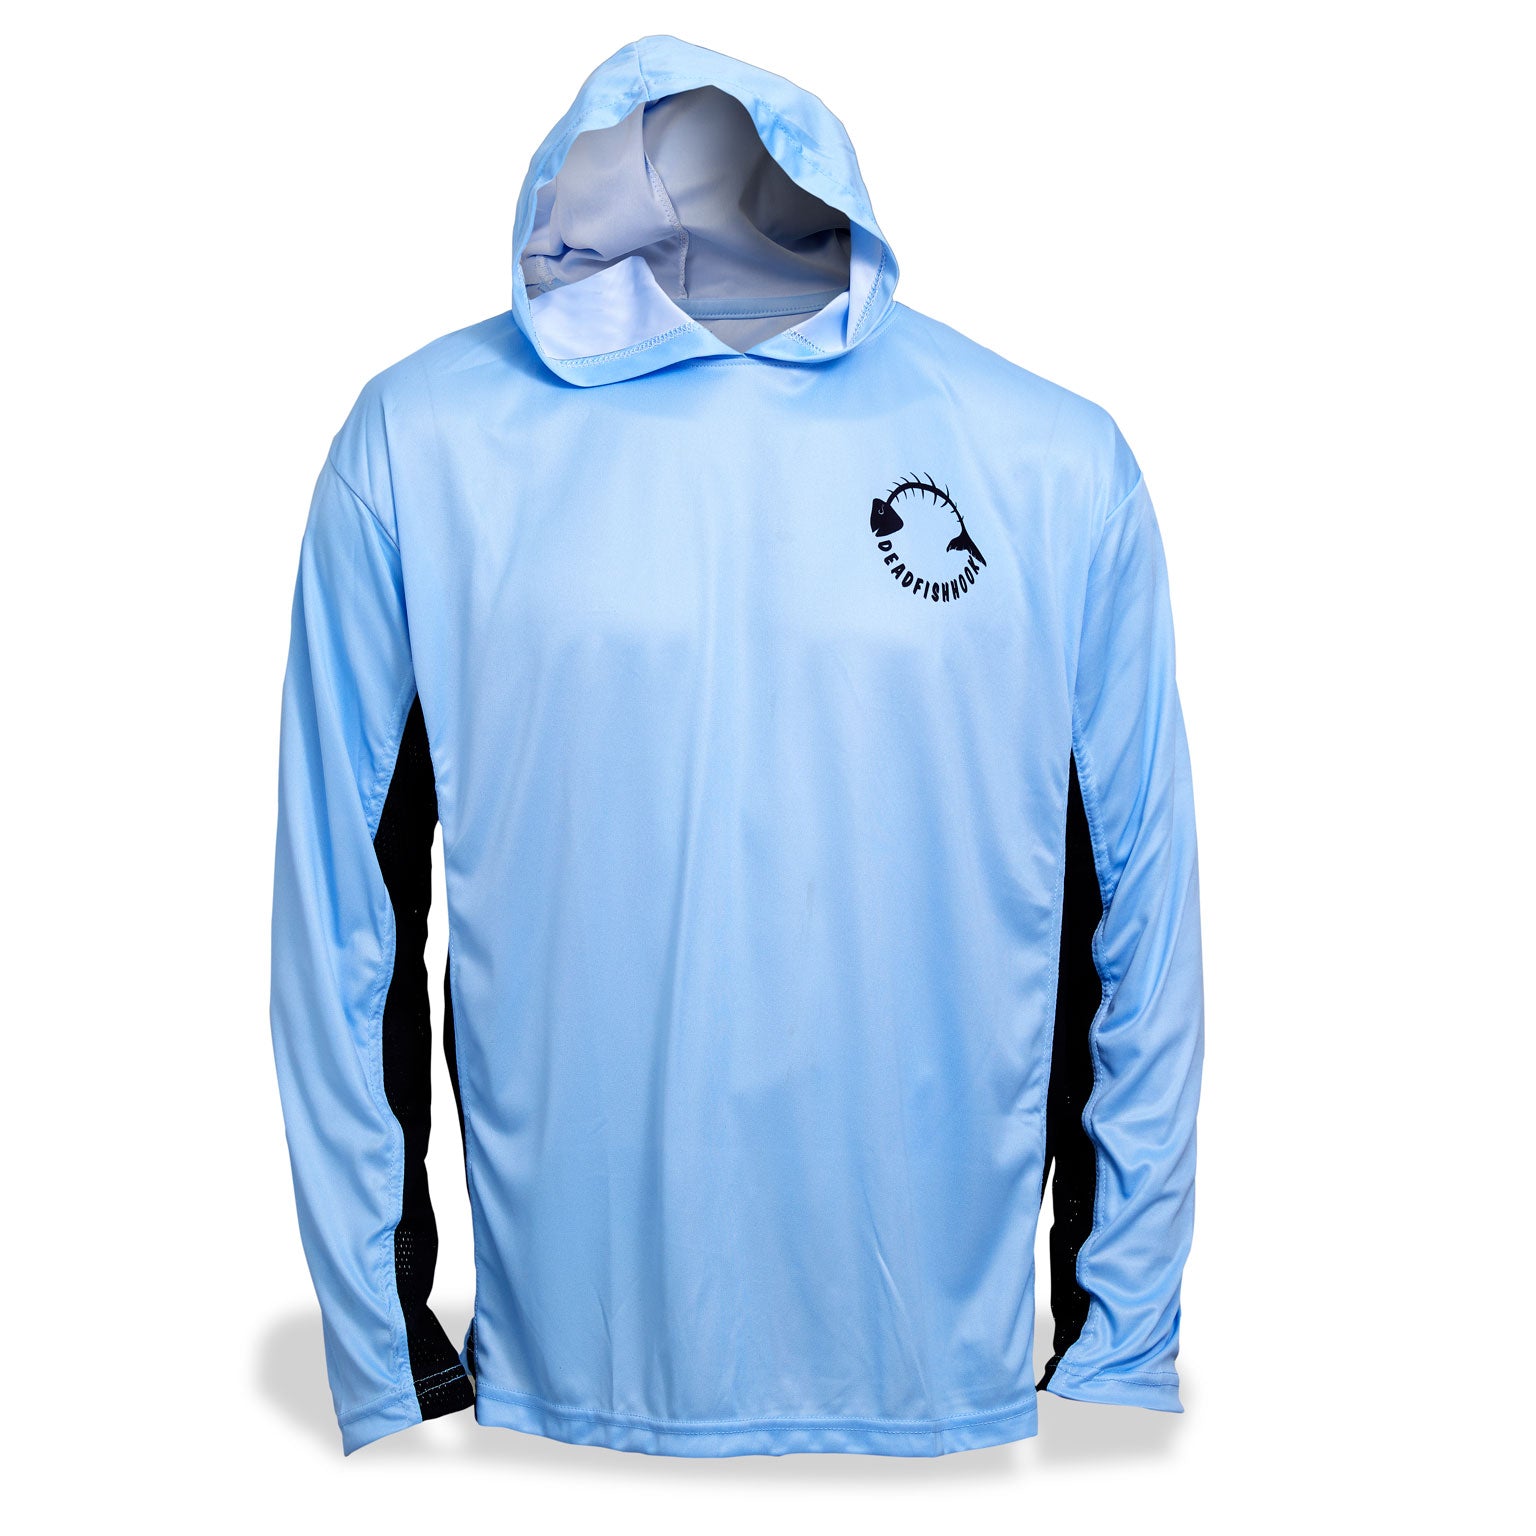 Dead Fish Hook light blue long sleeve performance fishing hoodie - front view with fish bone logo 